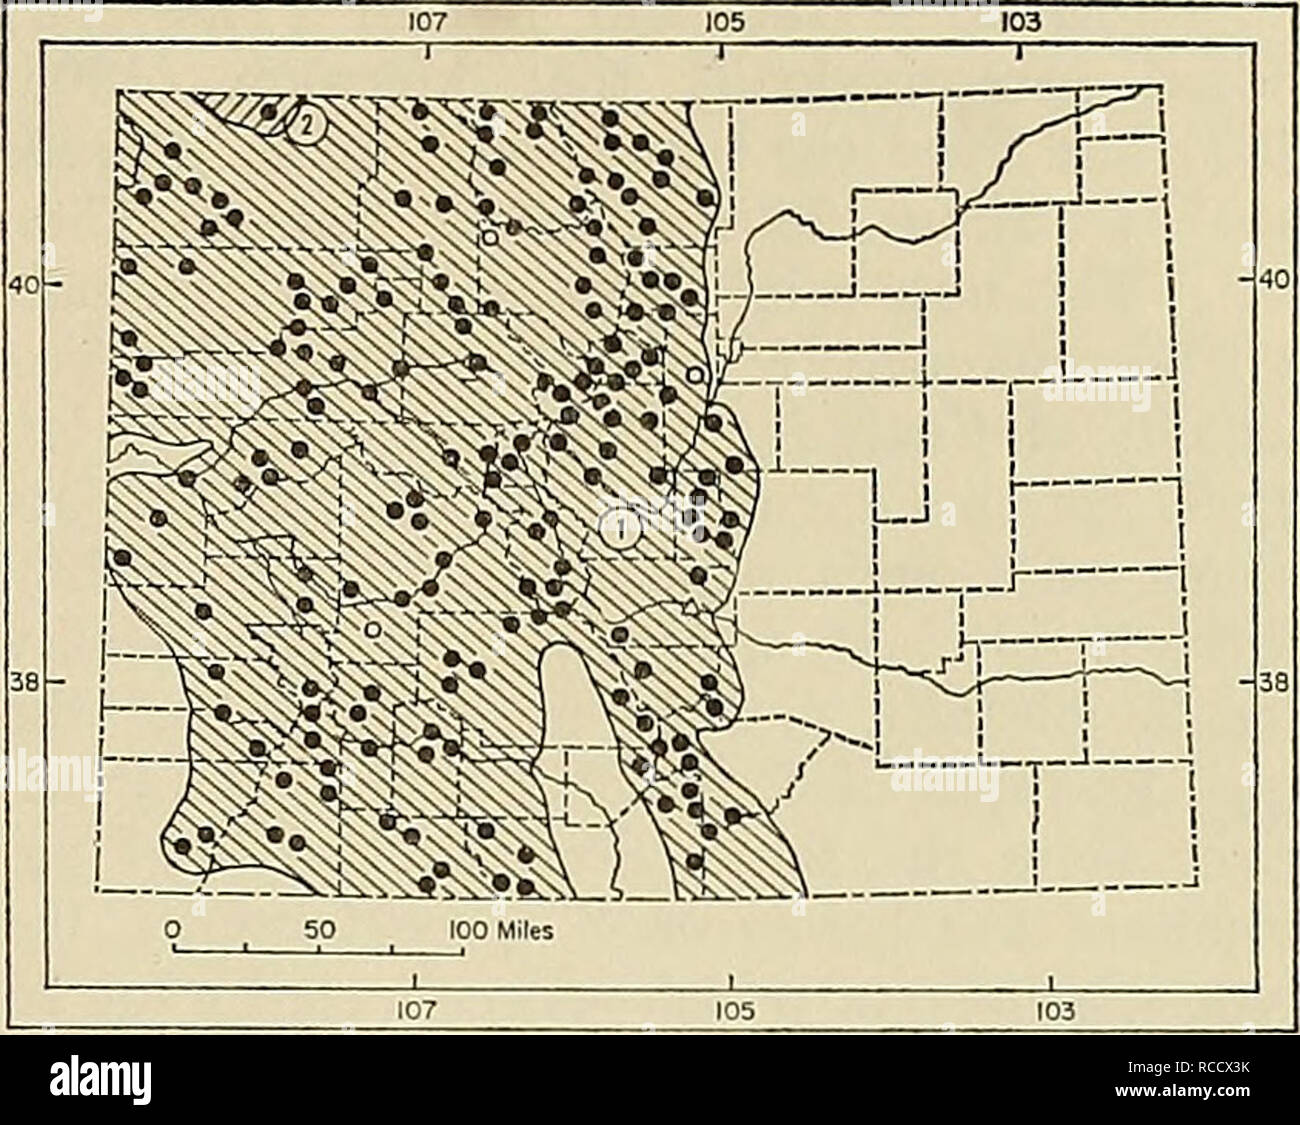 . Distribution of mammals in Colorado. Mammals. 1972 ARMSTRONG: COLORADAN MAMMALS 131 Additional records: GARFIELD COUNTY: above Glenwood Springs (Warren, 1942:118). JEFFER- SON COUNTY: &quot;near Golden City&quot; (J. A. Allen, in Coues and Allen, 1877:836). MESA COUNTY: Colorado National Monument (P. H. Miller, 1964:48). DELTA COUNTY (Warren, 1942:119): Cedaredge; Cory. GUNNISON COUNTY (Durrant and Robin- son, 1962:246): Dry Creek, 3/4 mi. N Gunnison River, 7460 ft.; Gunnison River, 3 mi. NE Cimarron, 6907 ft.; Black Canyon of the Gunnison River, 2 mi. NE Cimarron, 7150 ft. SAGUACHE COUNTY:  Stock Photo